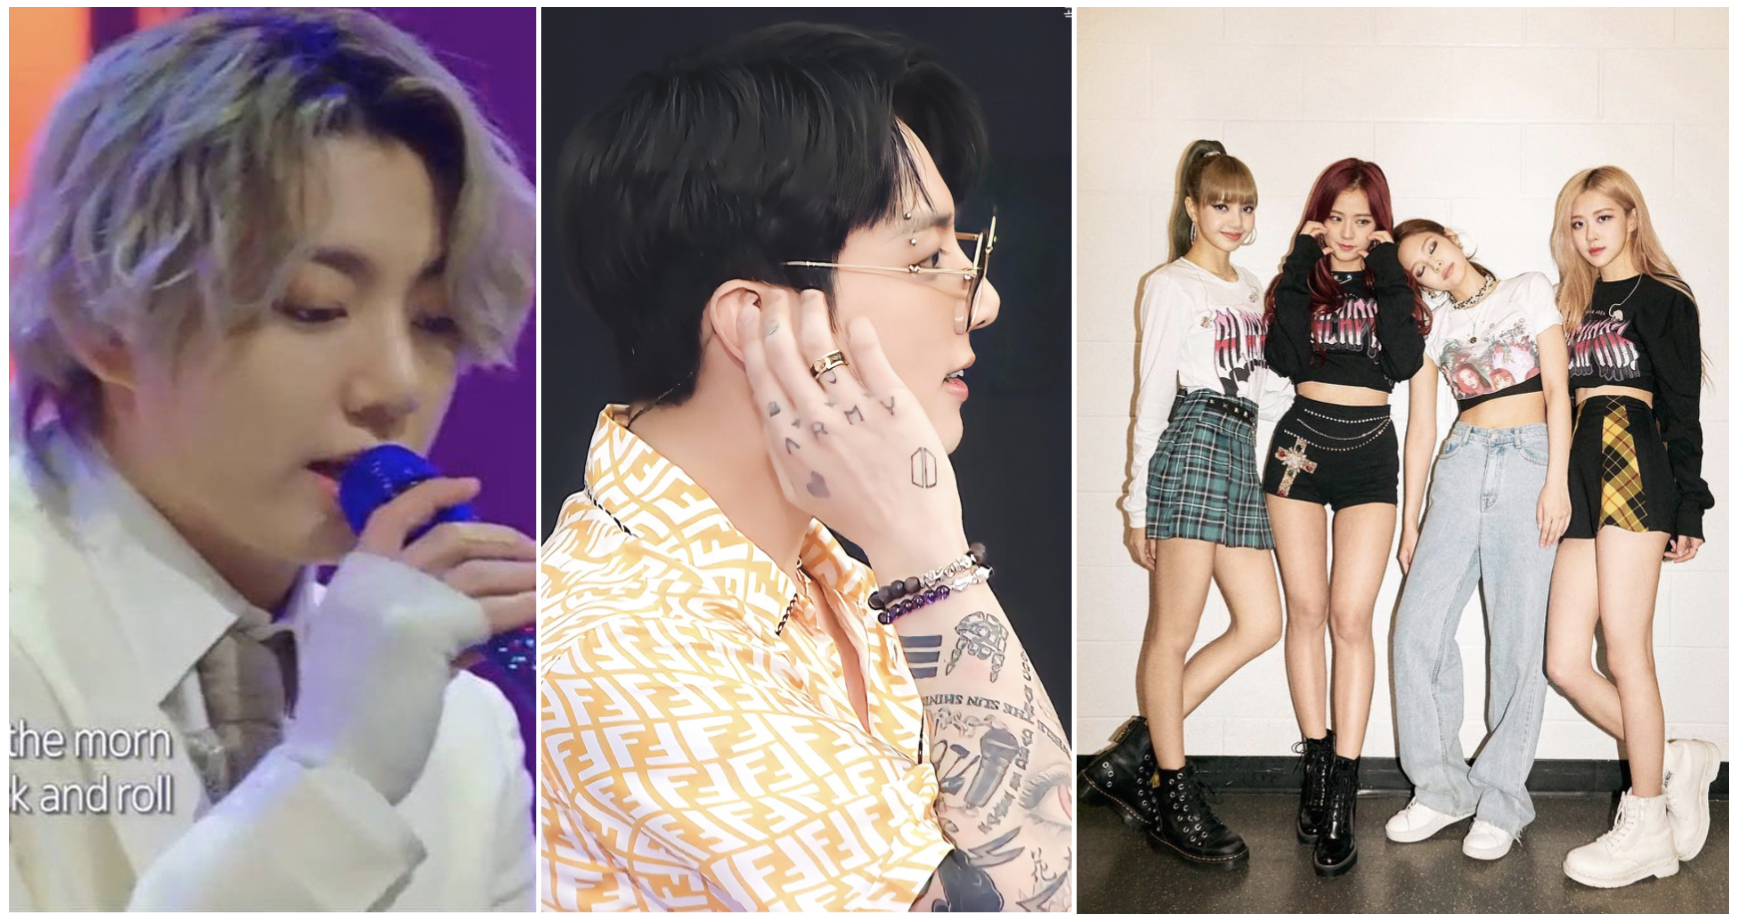 BTS’ Jungkook has to cover up his tattoos for TV appearances while girl groups like Blackpink wear high-waisted pants to avoid showing off their belly buttons ... what other broadcast rules do K-pop idols have to follow? Photos: @ryuhojeong92; @taebear123V/Twitter, @blackpinkofficial/Instagram